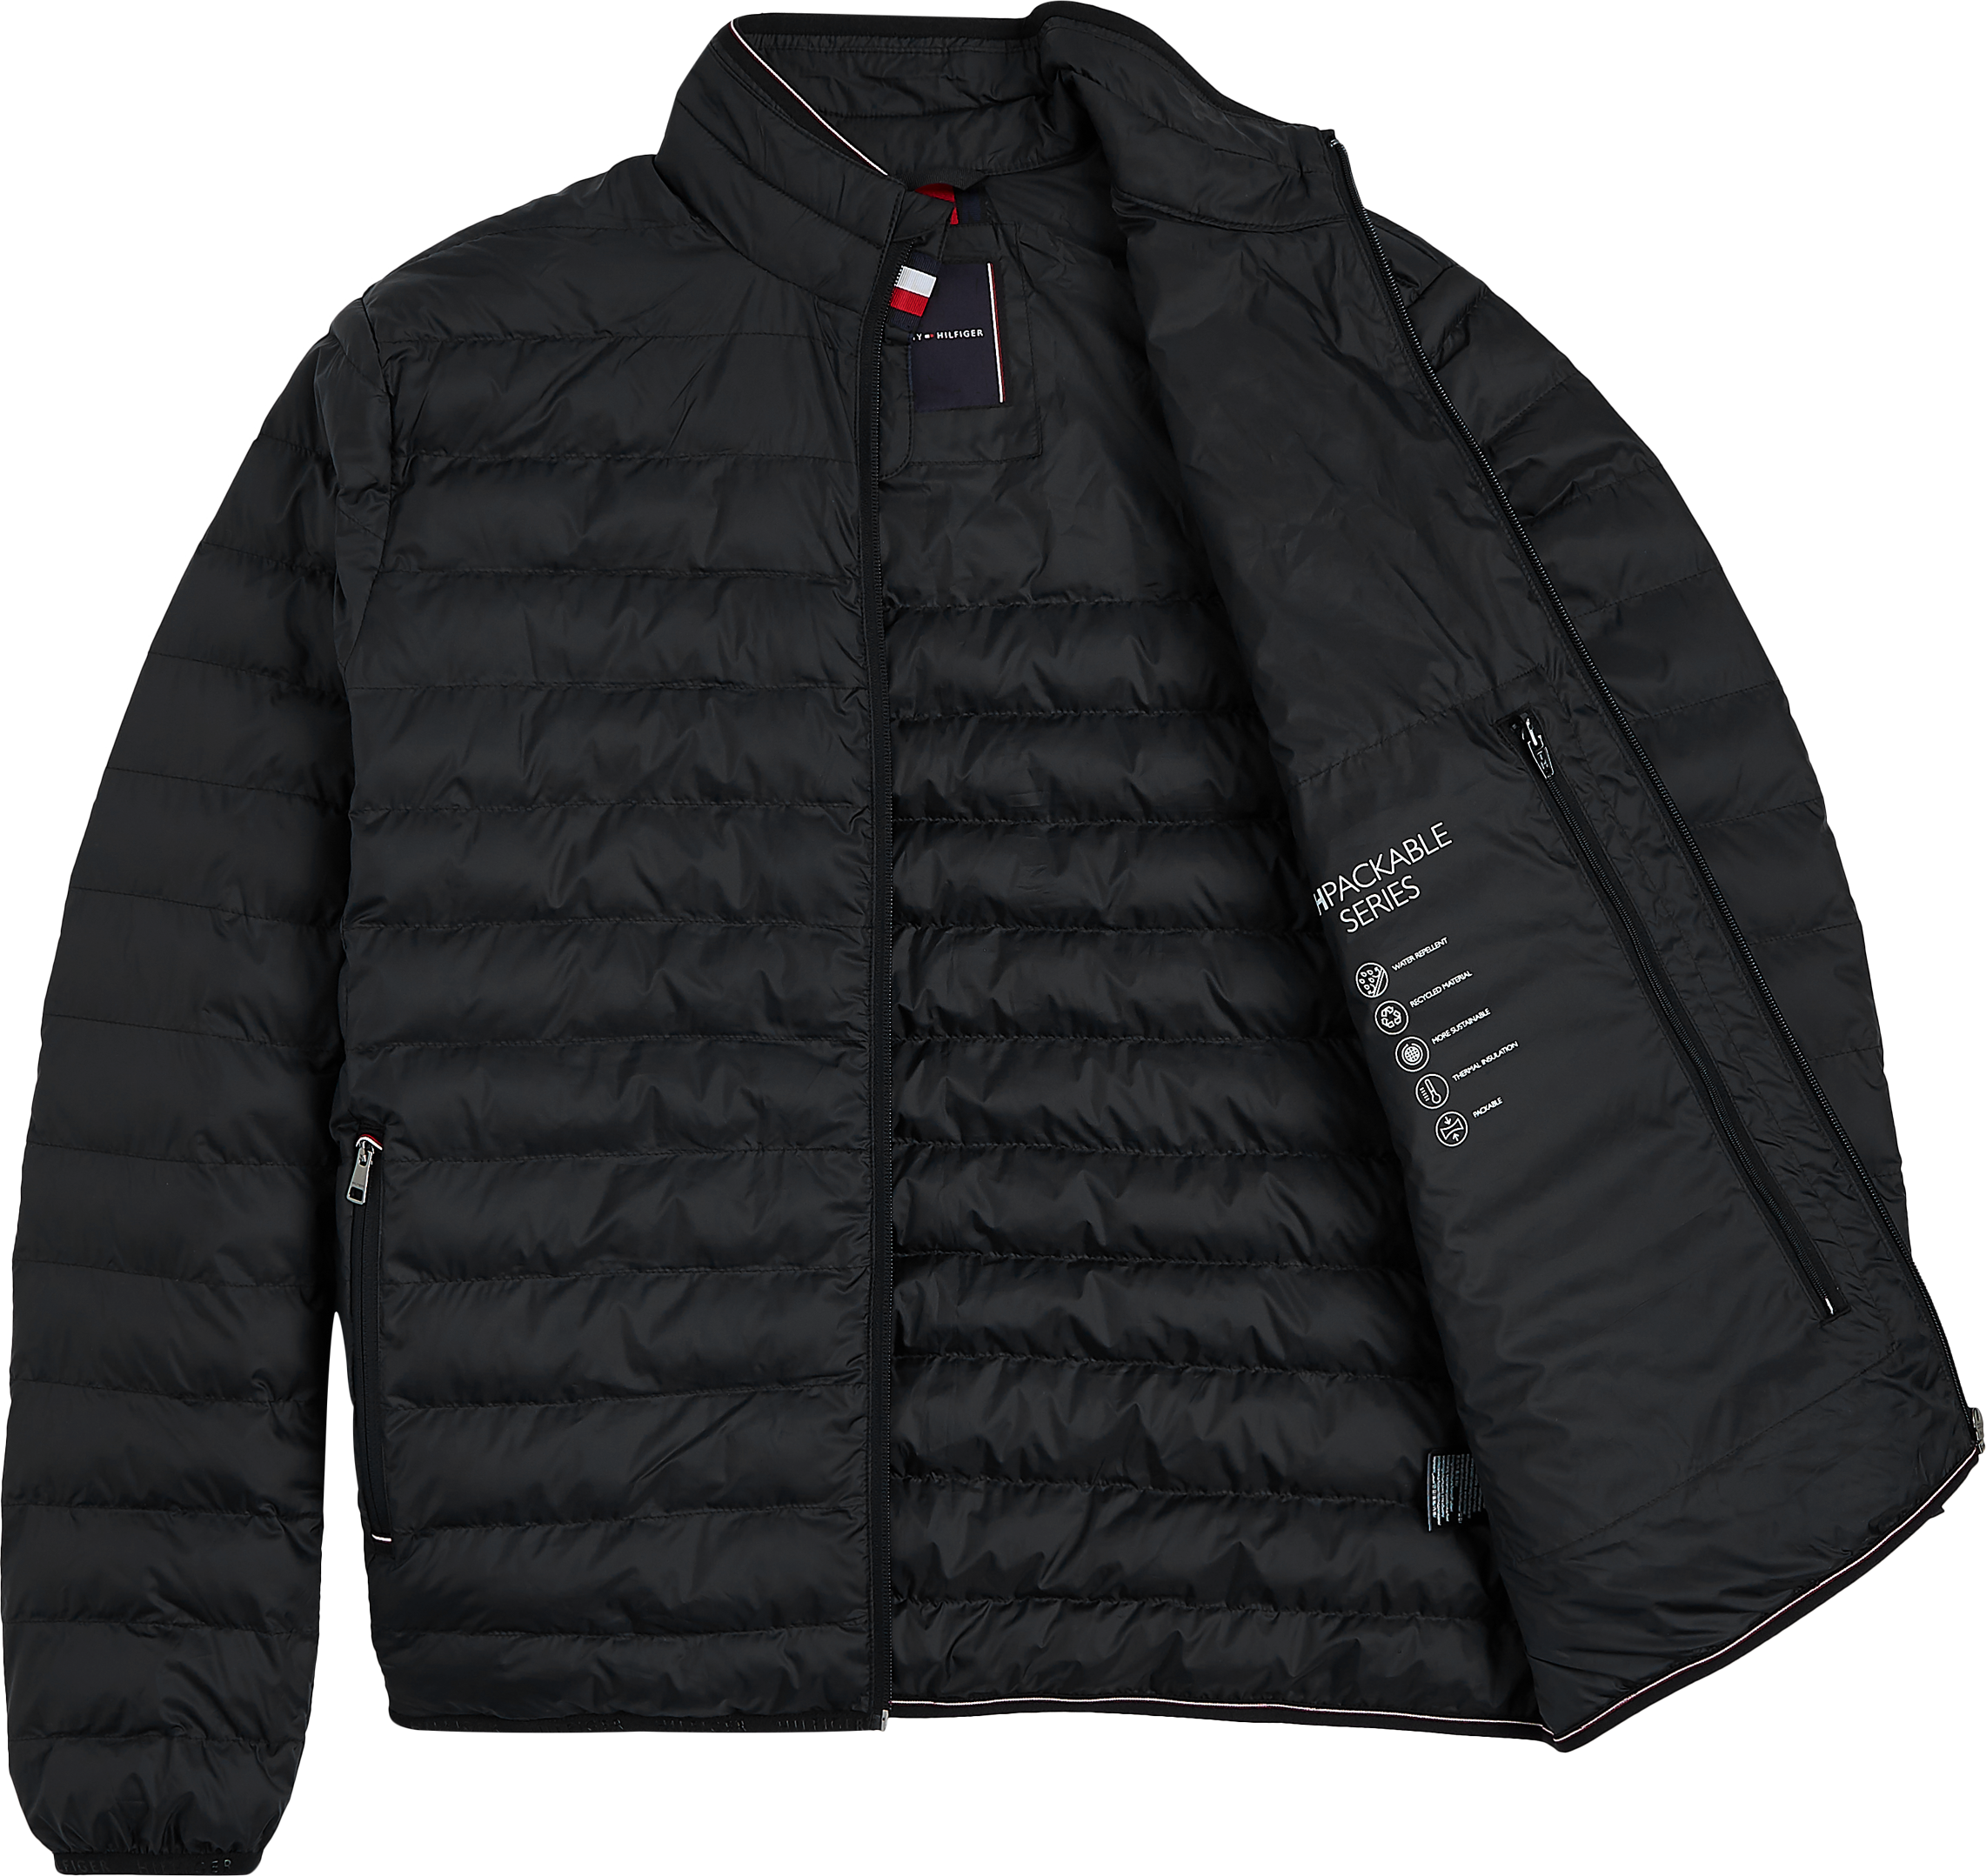 (Recycled) Tommy Hilfiger Jacket - Padded - Galvin Men Core Black Packable for